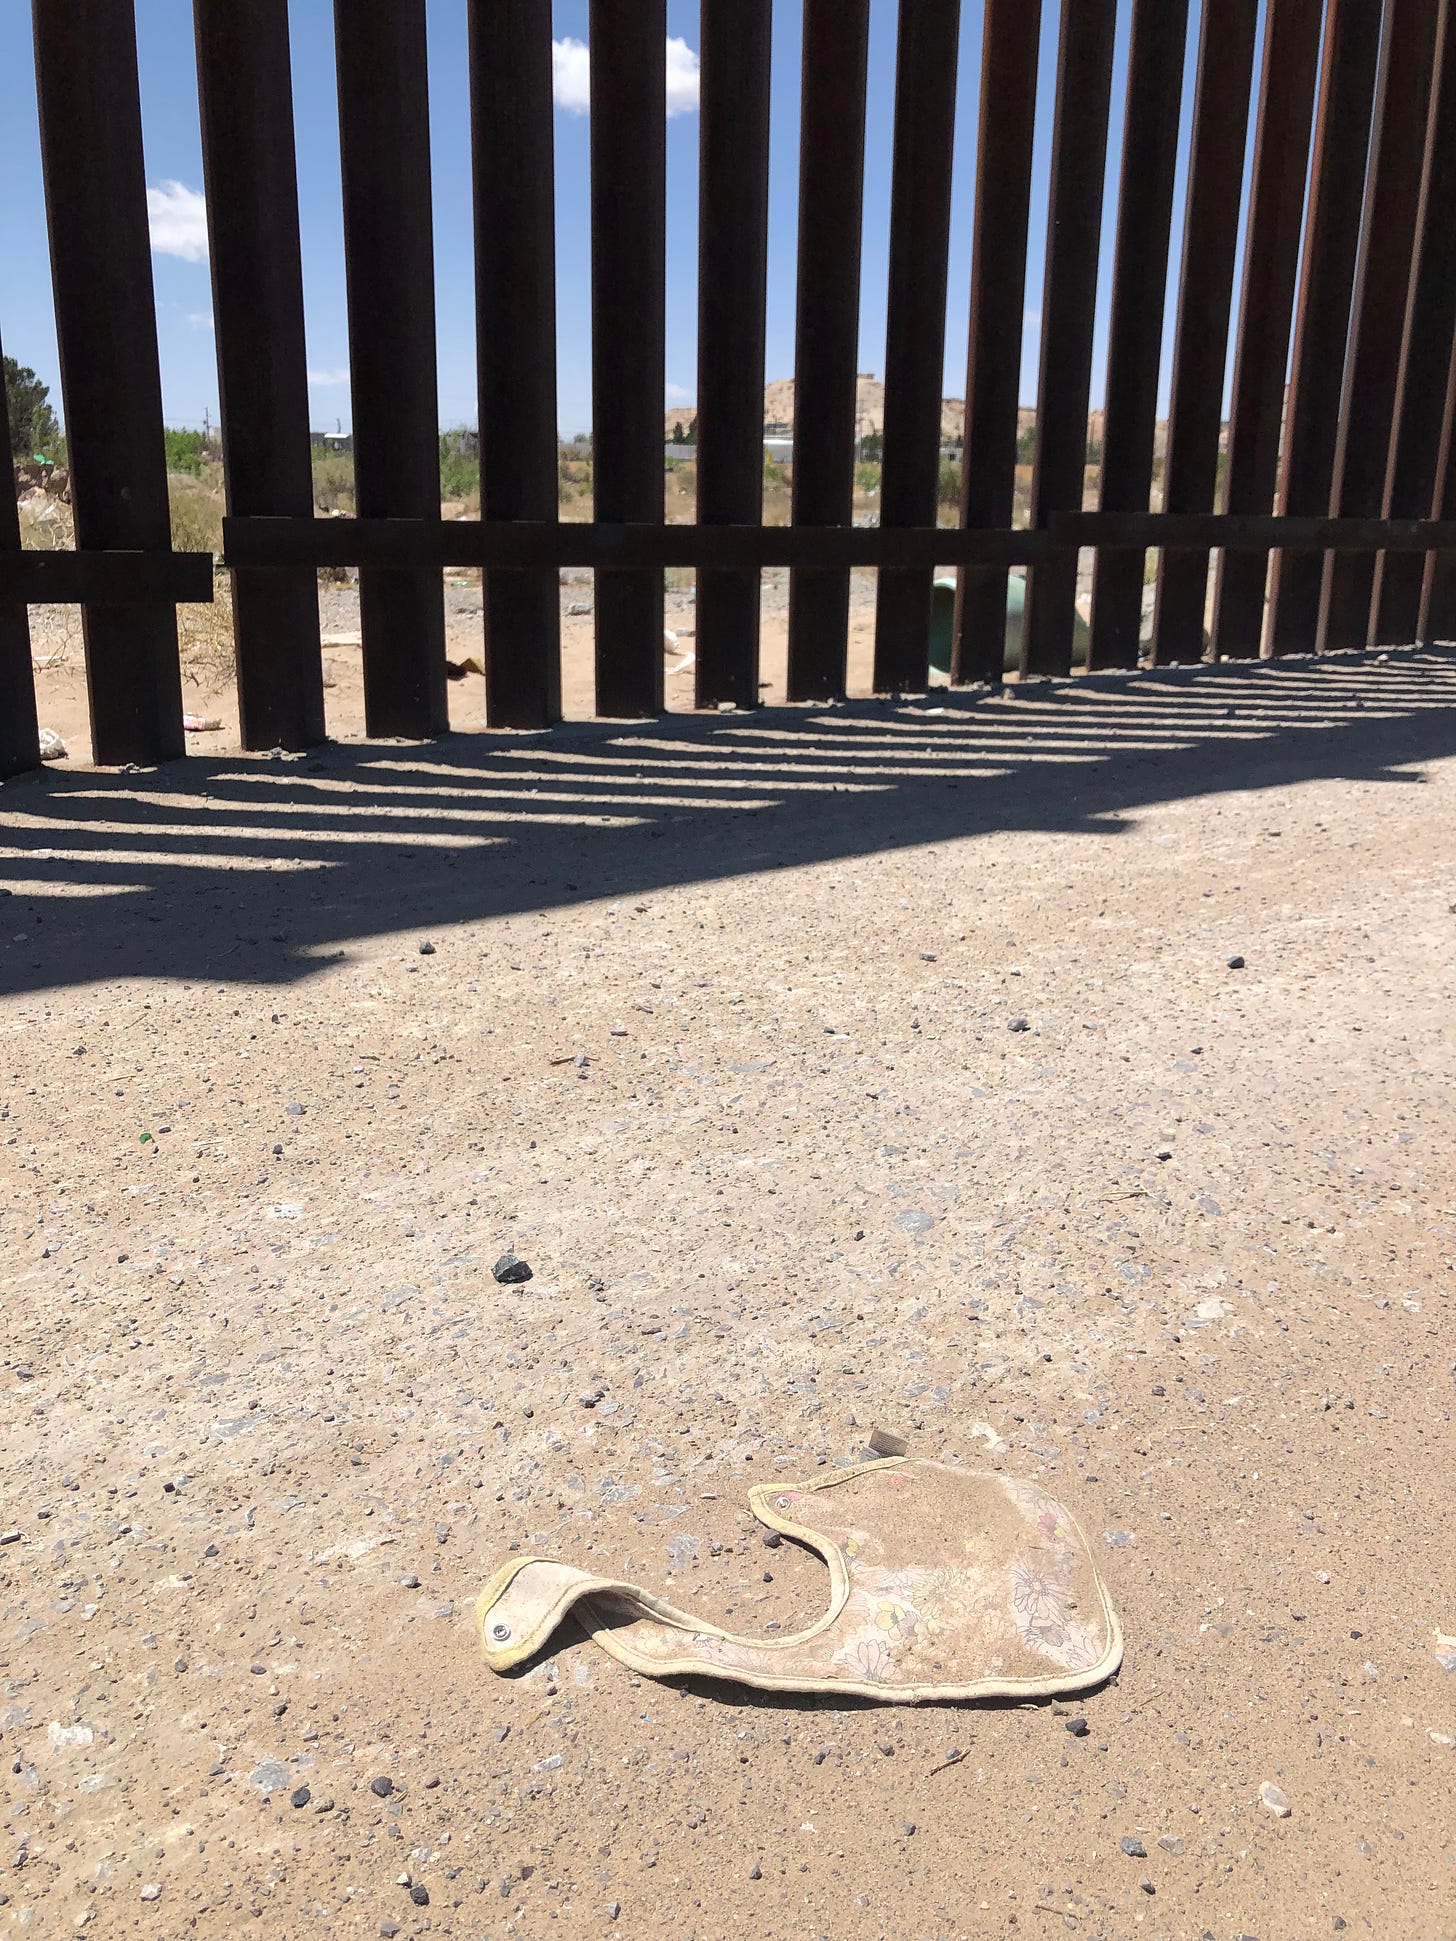 Photo of a dirty, discarded baby bib with the border wall visible in the background.